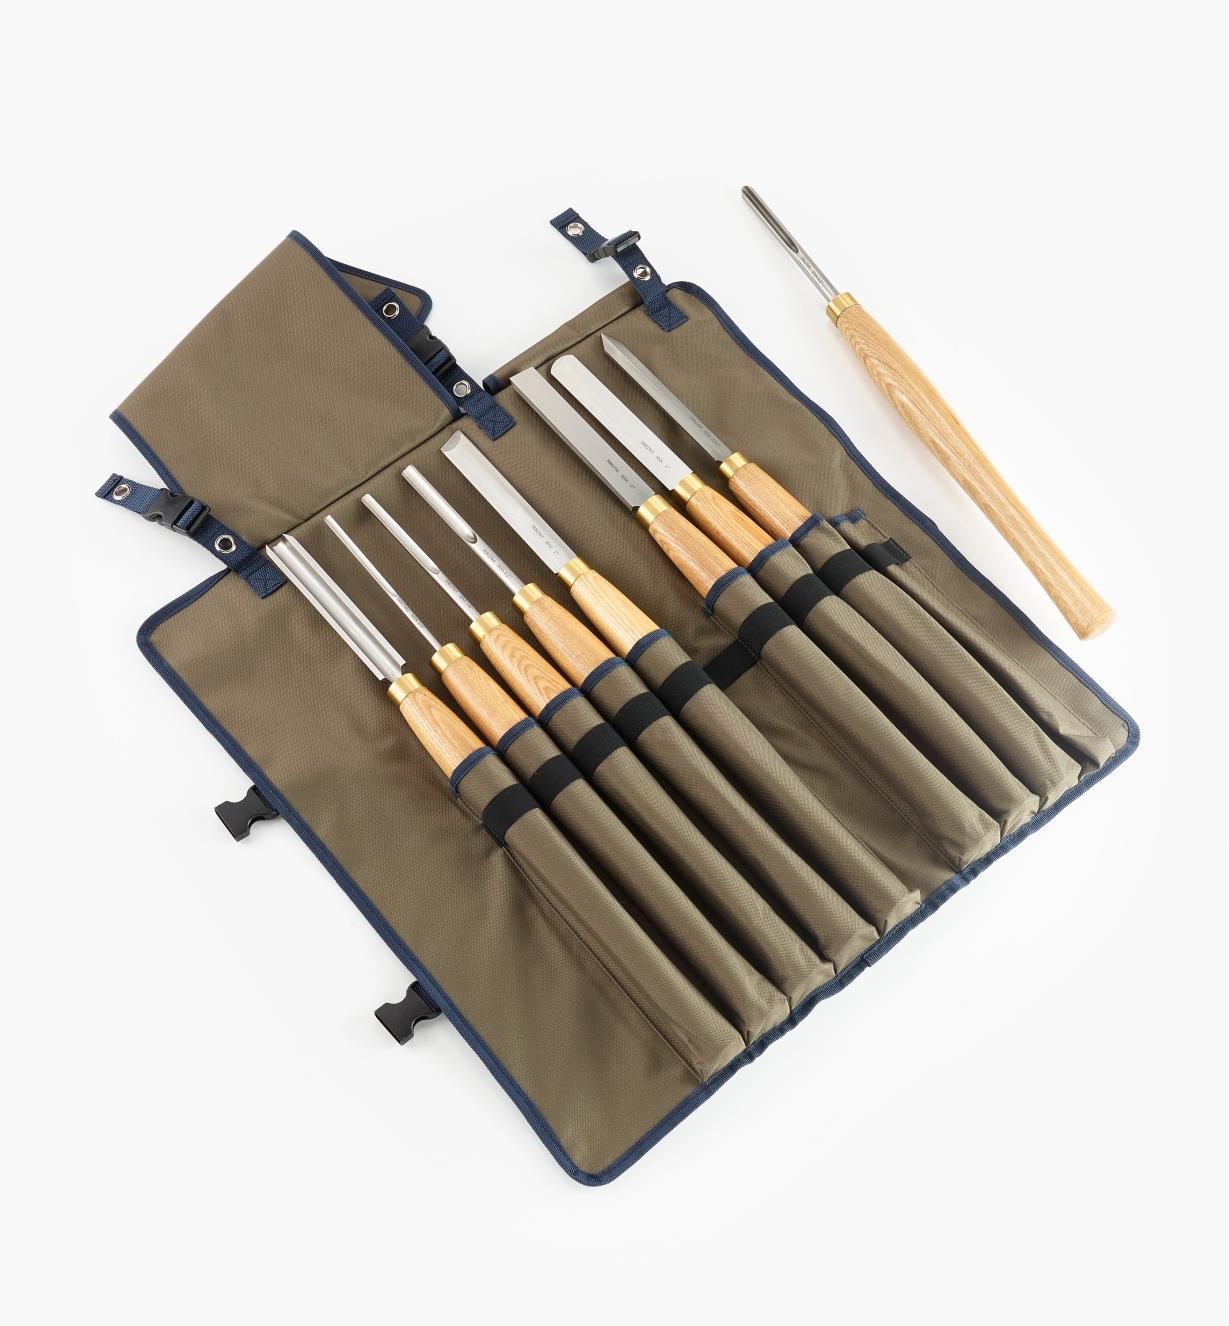 58B2530 - Complete Set of 9 & Tool Roll